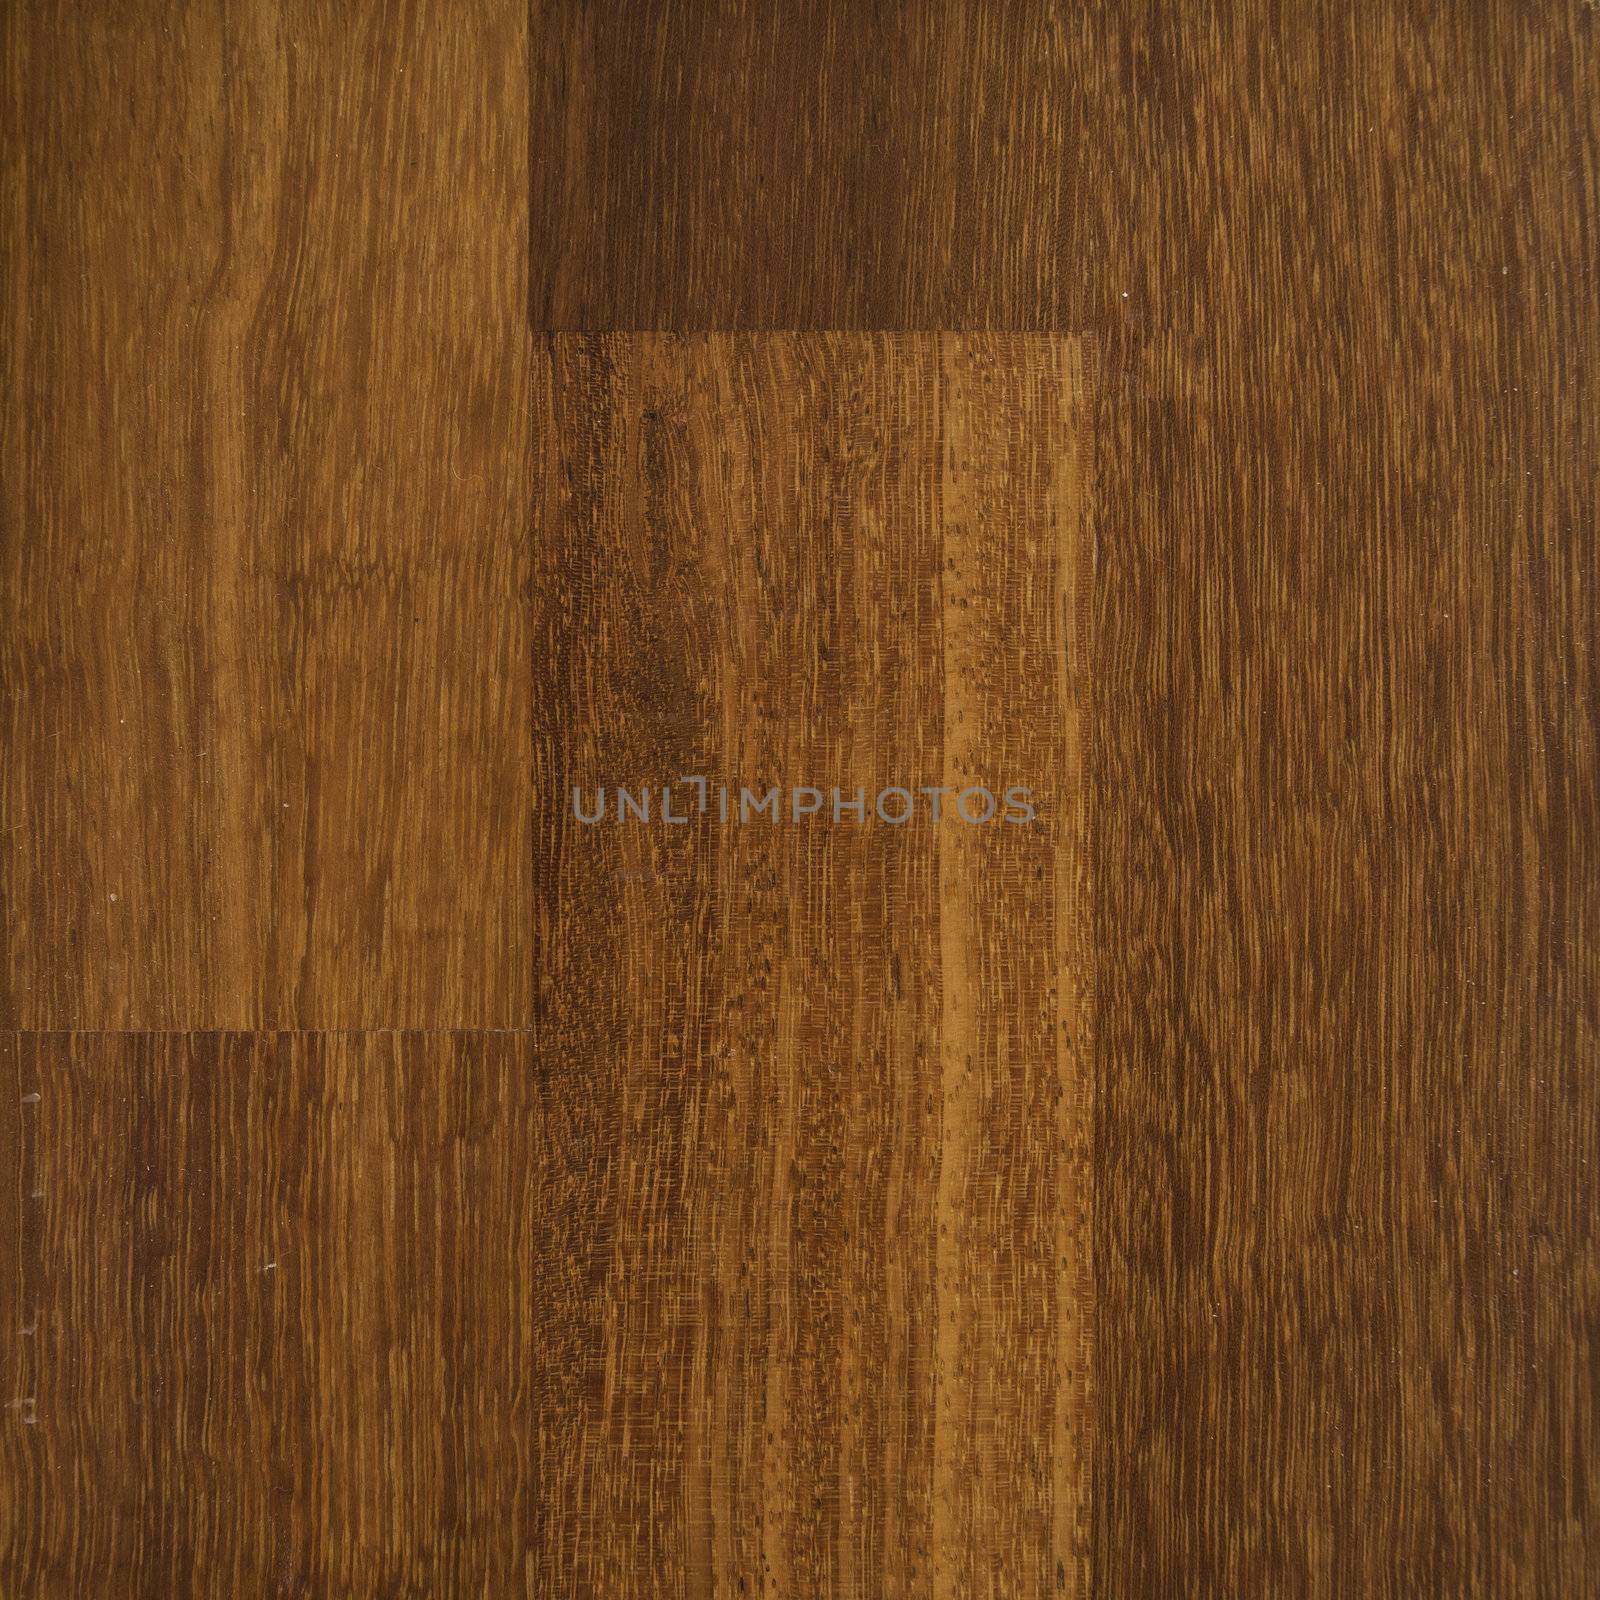 Detail of wood floor by siraanamwong